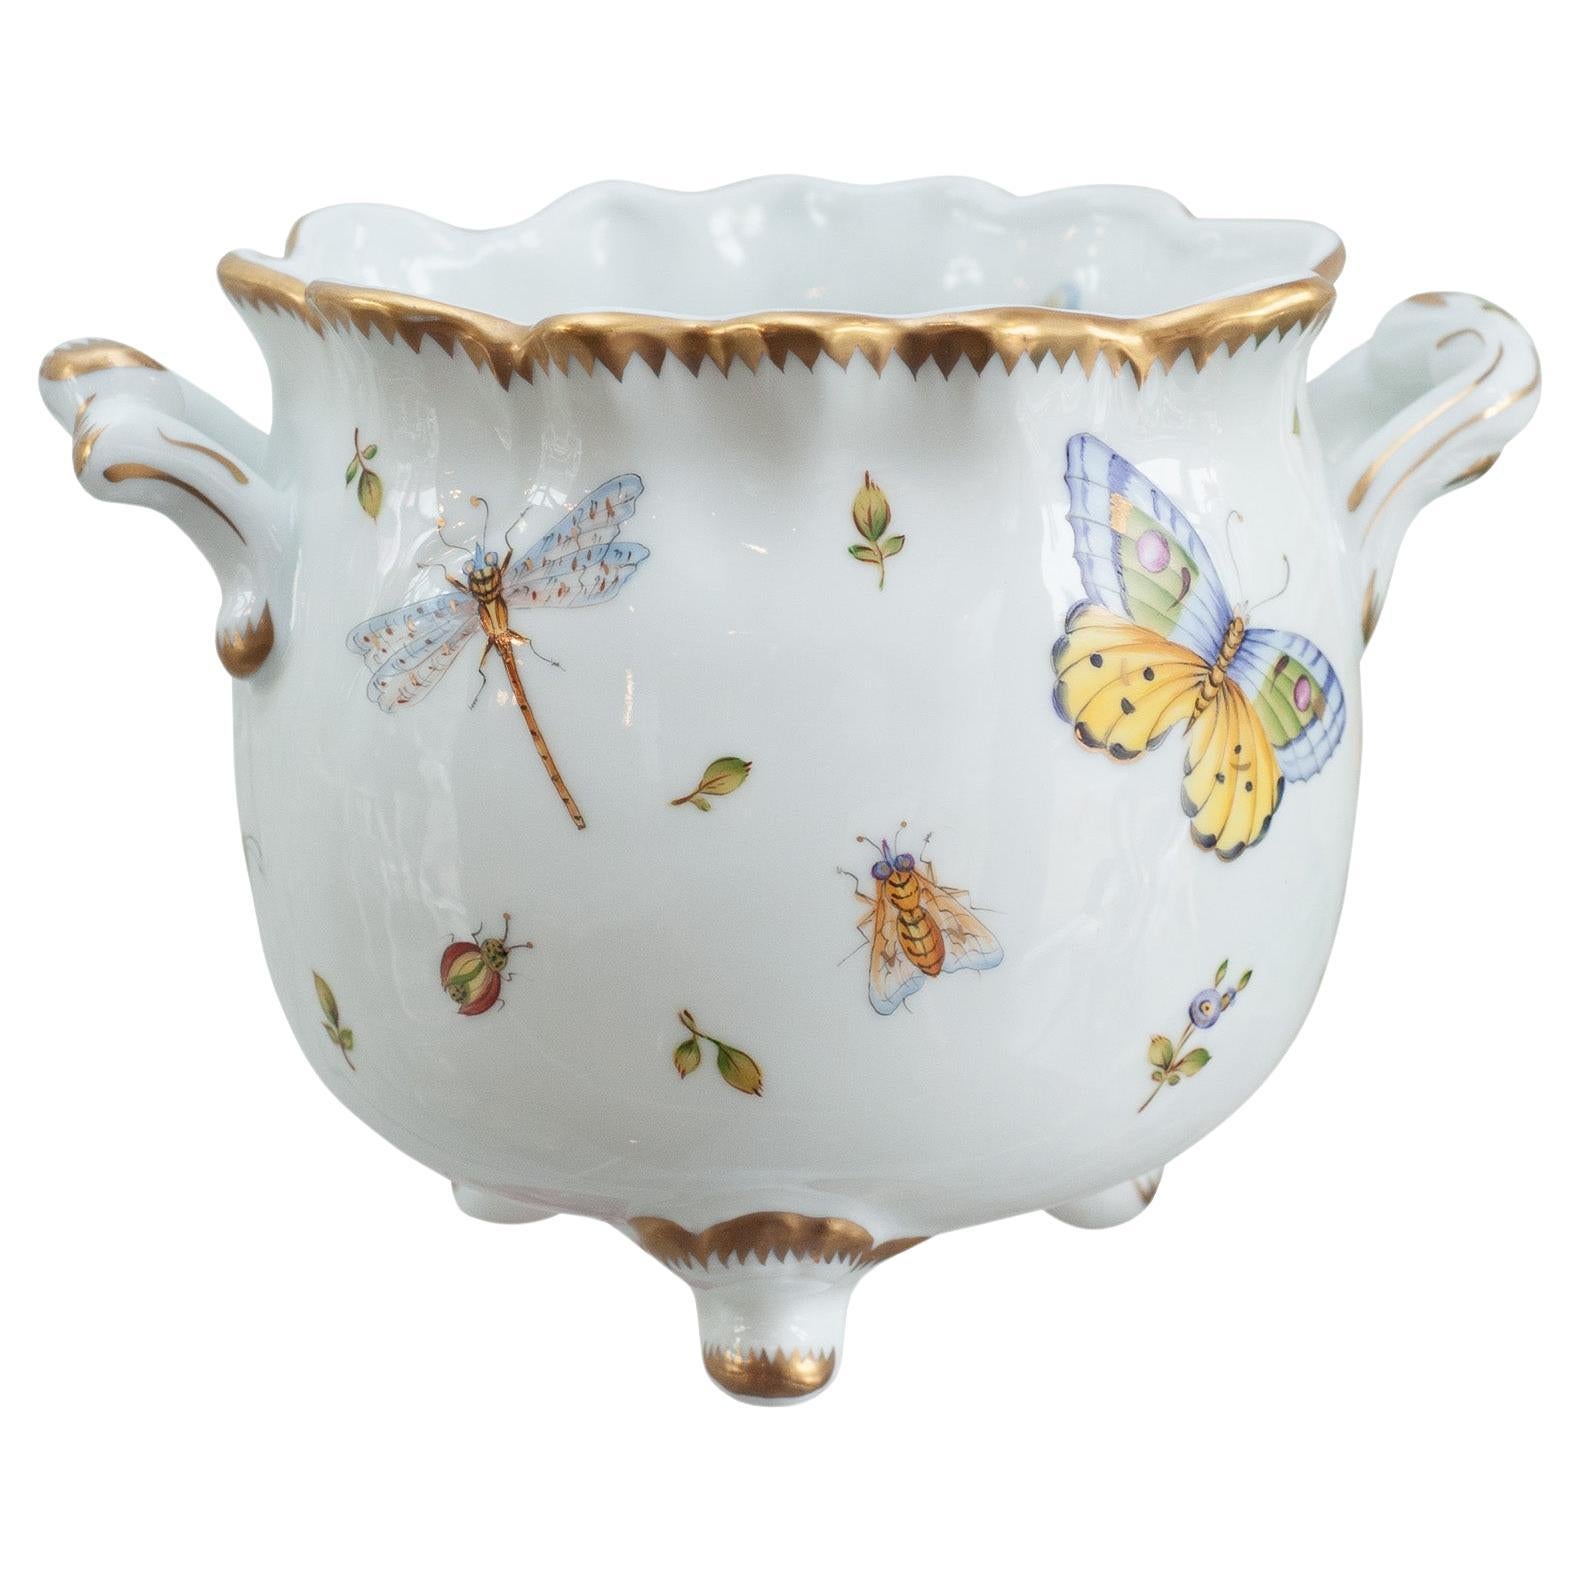 Anna Weatherley Designs Hand-Painted Footed Porcelain Cachepot Handles For Sale